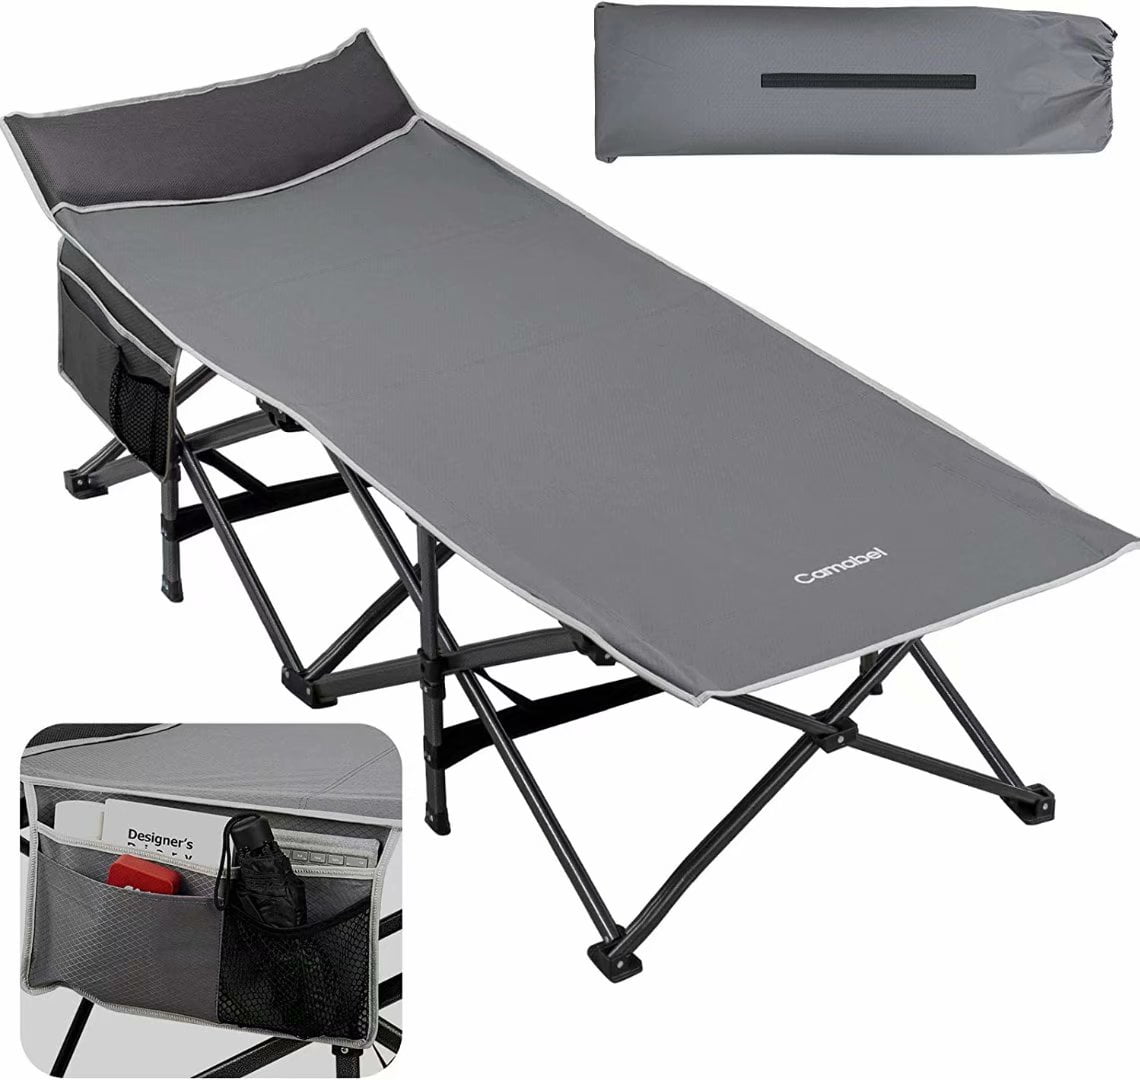 Folding Bed Camping Portable Cots Guest Beds Office Nap Support Up to 600LB+Bag 